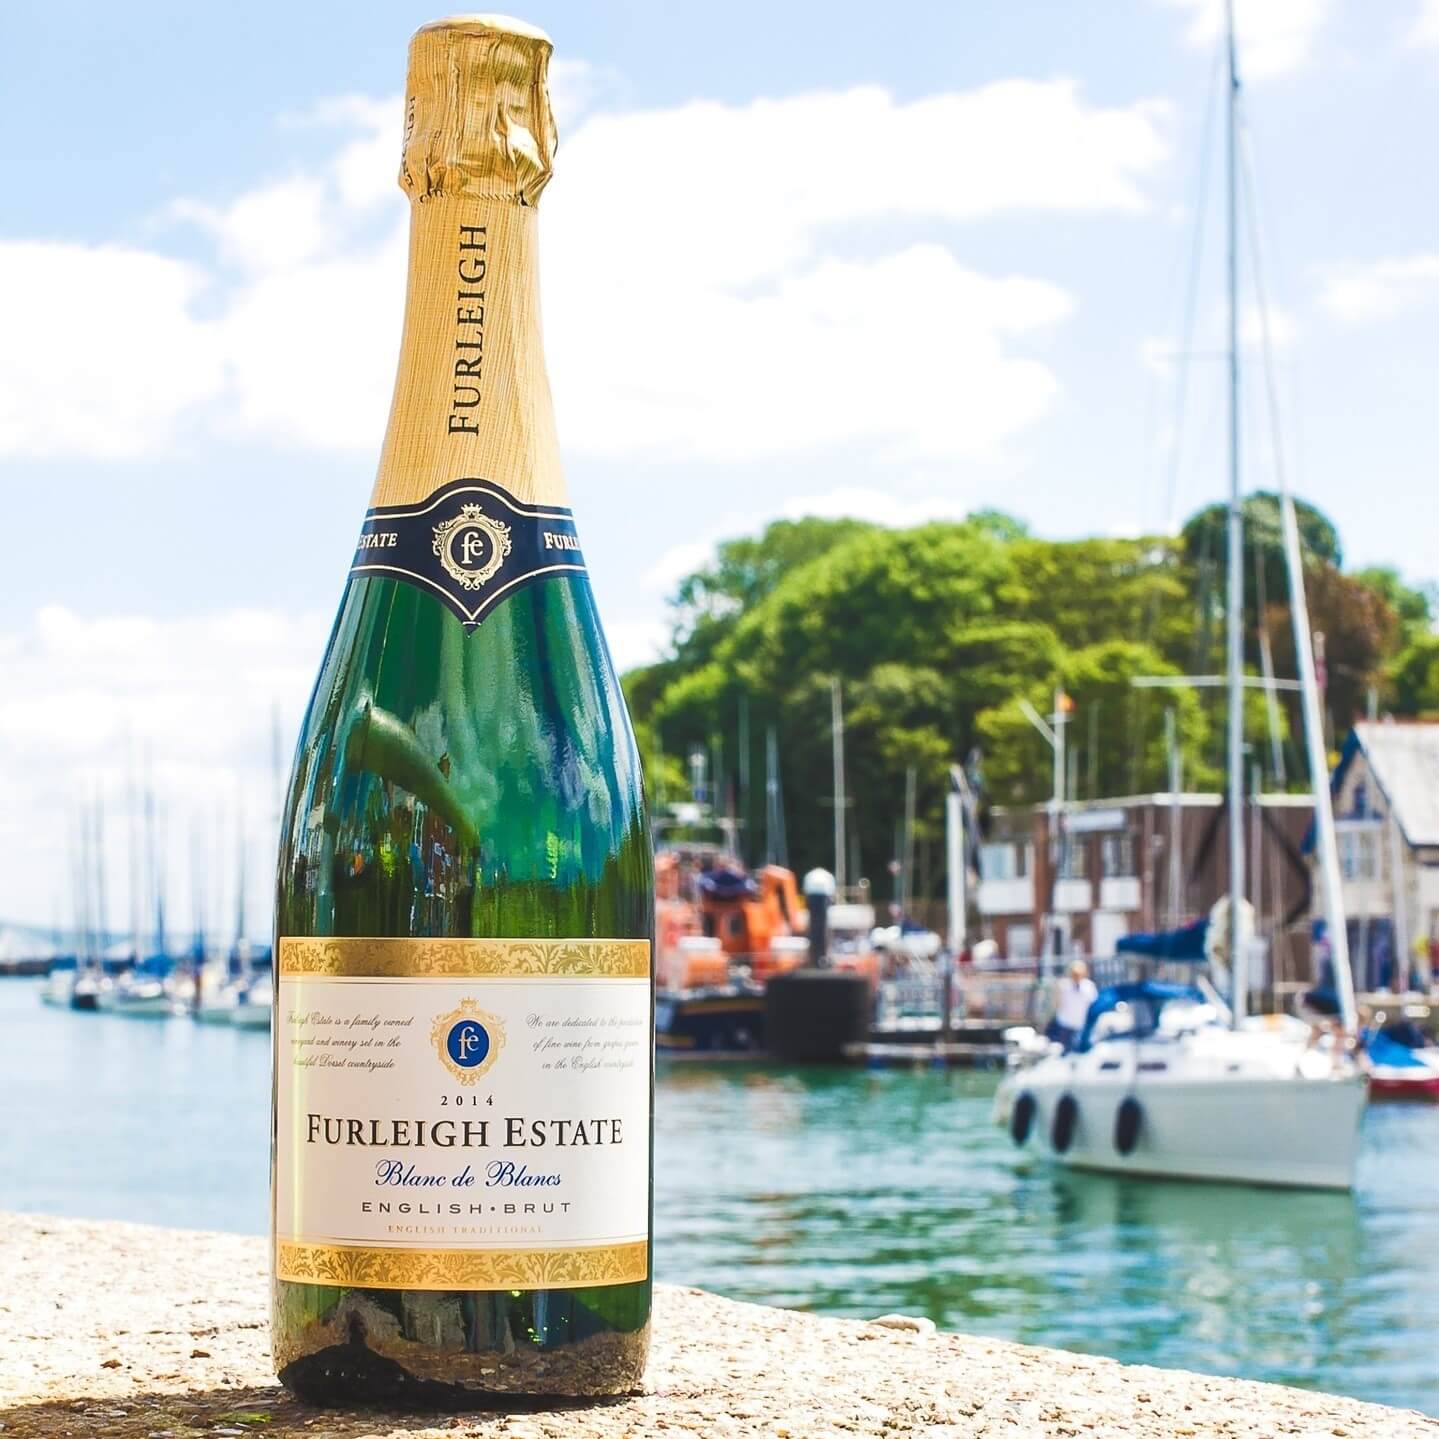 Image of Blanc de Blancs 2016 by Furleigh Estate, designed, produced or made in the UK. Buying this product supports a UK business, jobs and the local community.